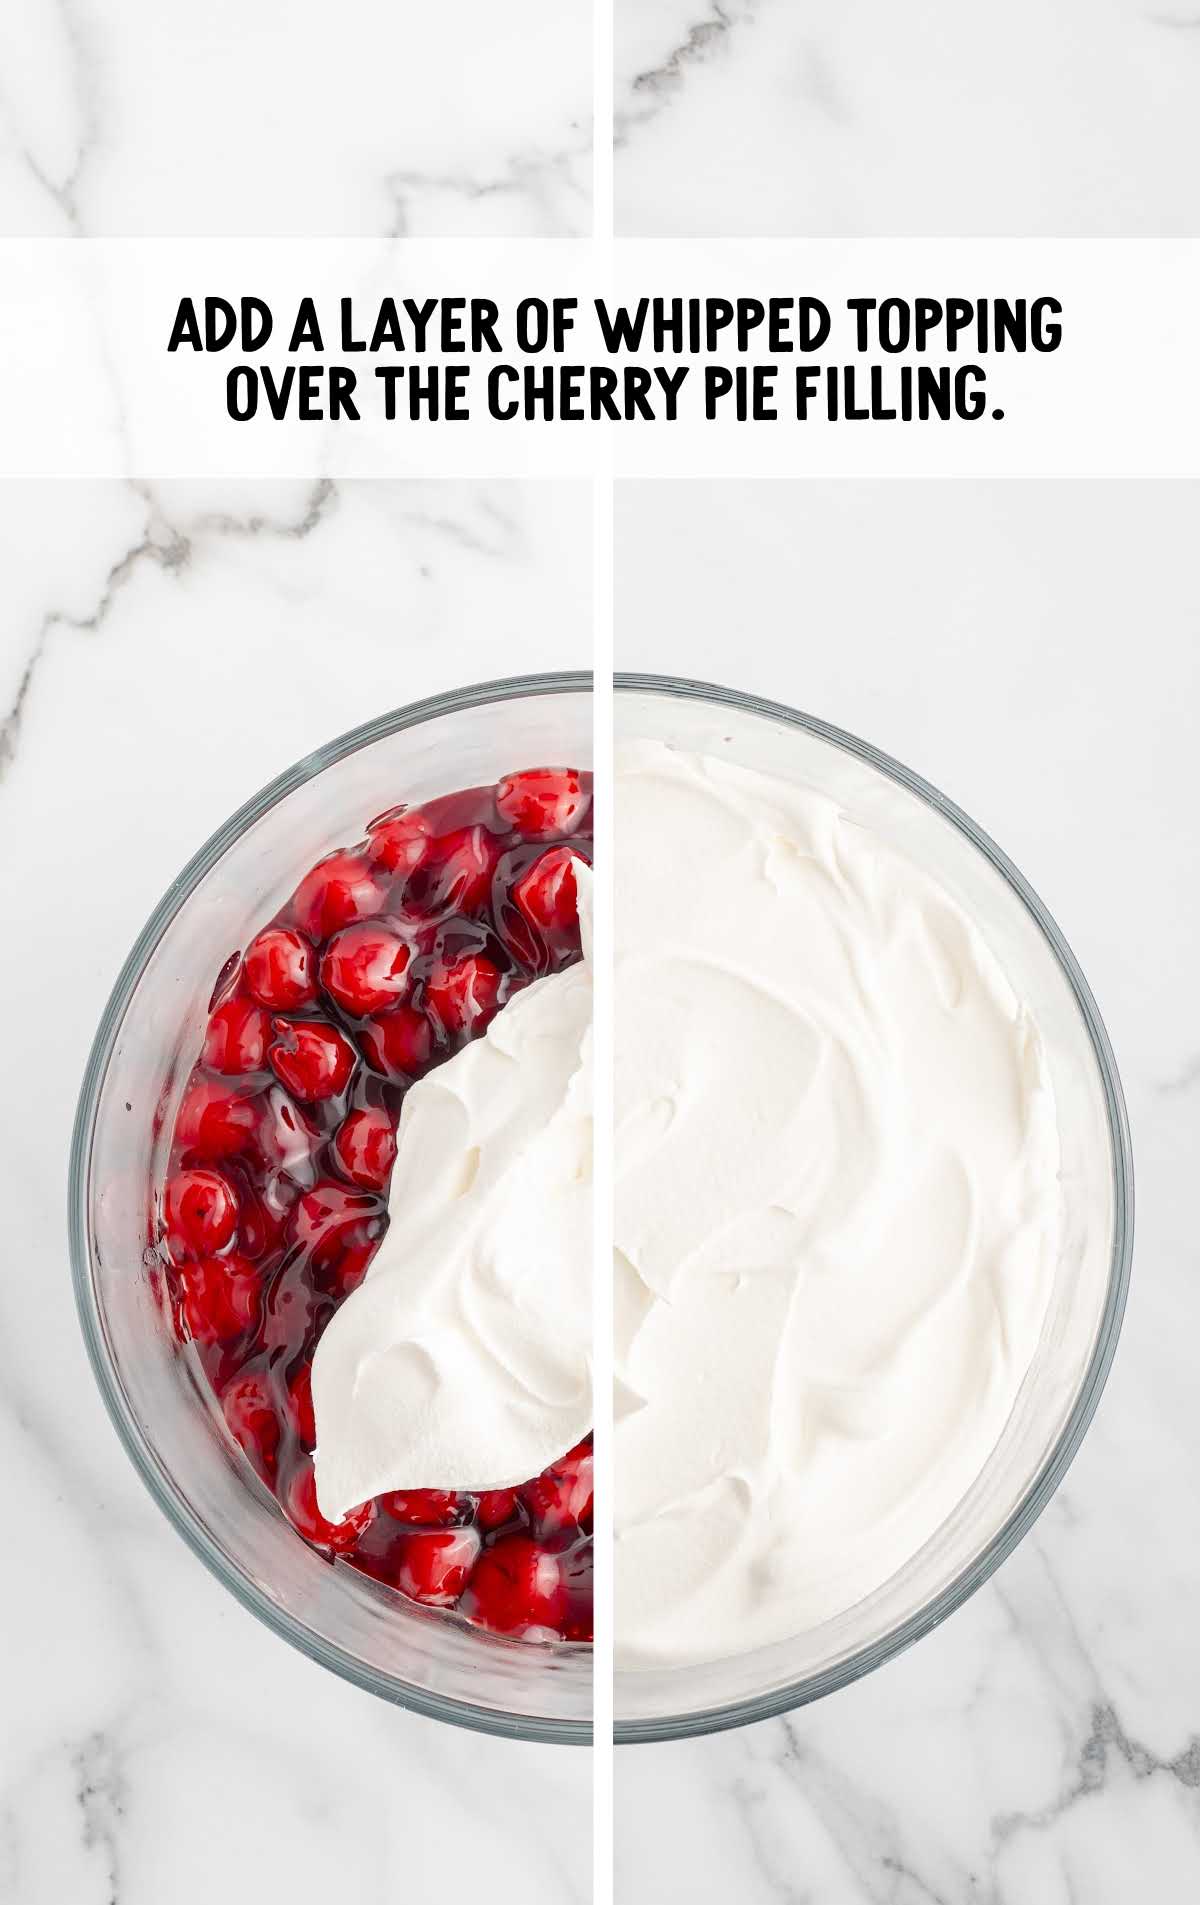 whipped topping spread over the cherry pie filling